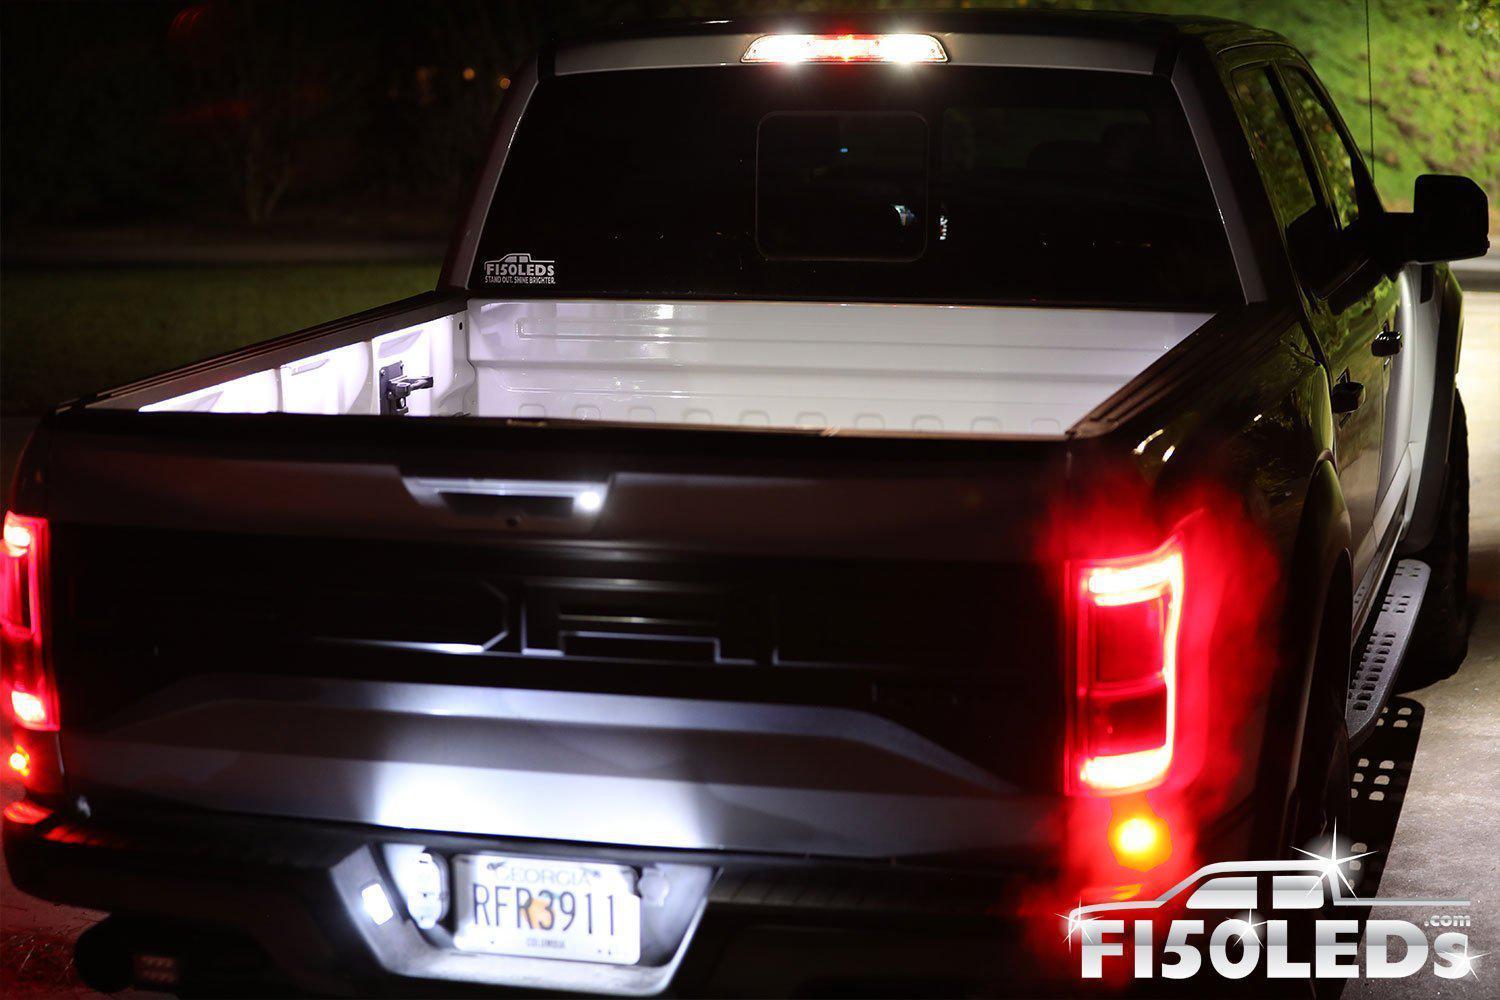 2021 - 2022 Integrated F150 Bed Cargo Area Premium LED lights ...